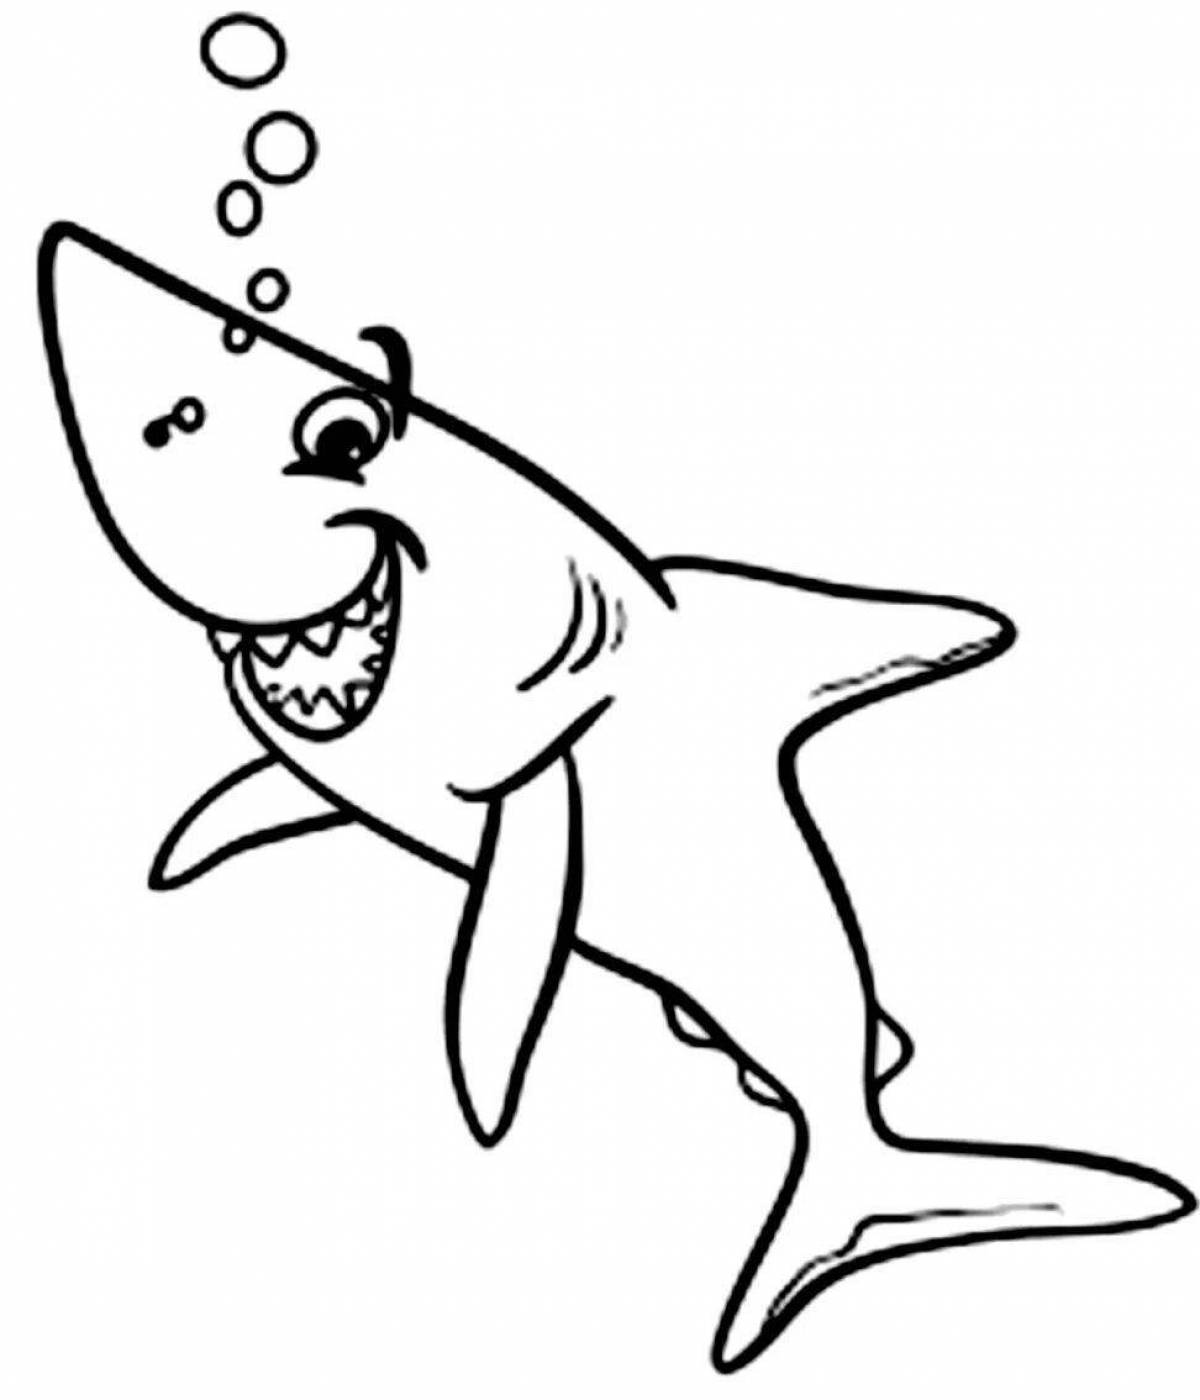 Creative shark coloring book for 4-5 year olds